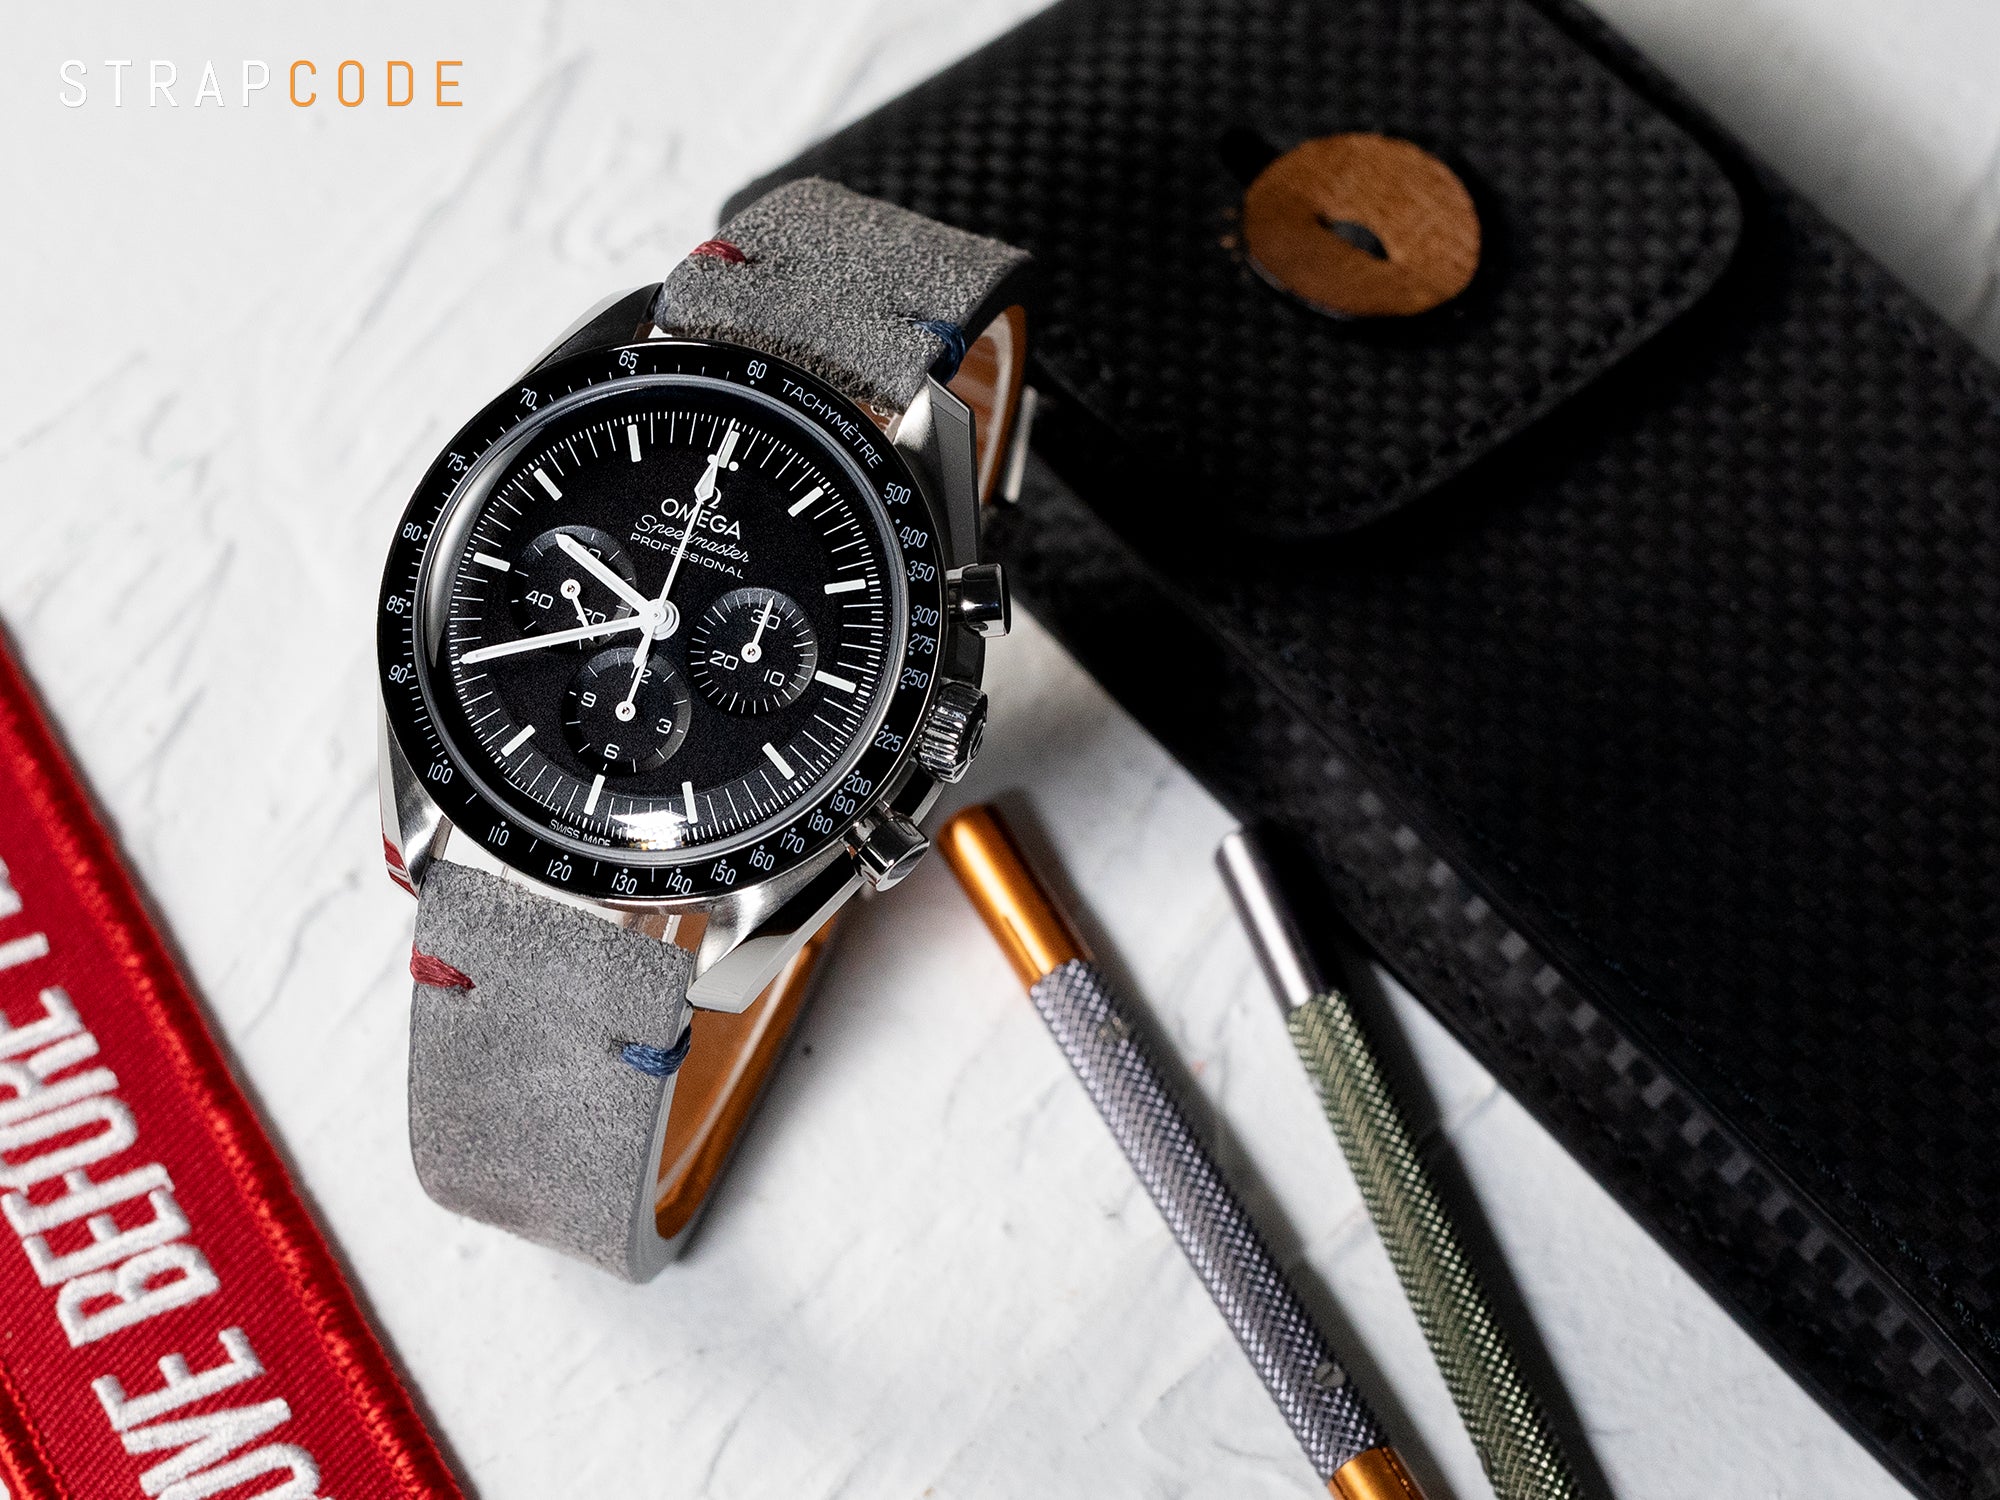 Omega Speedmaster paired with a Grey suede watch strap by Strapcode